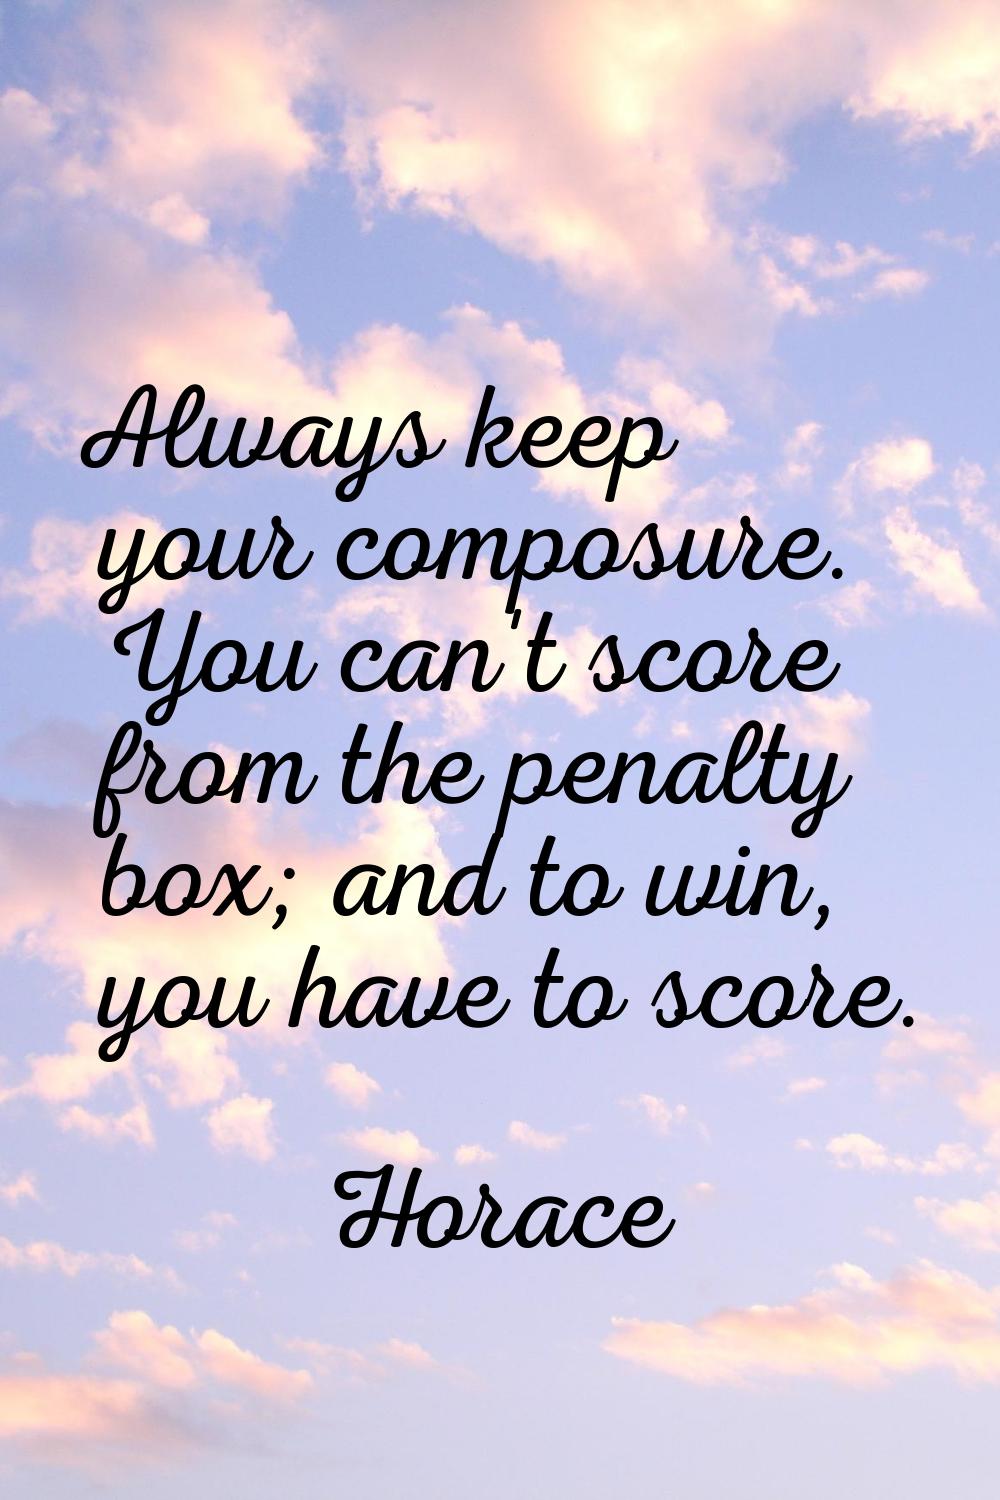 Always keep your composure. You can't score from the penalty box; and to win, you have to score.